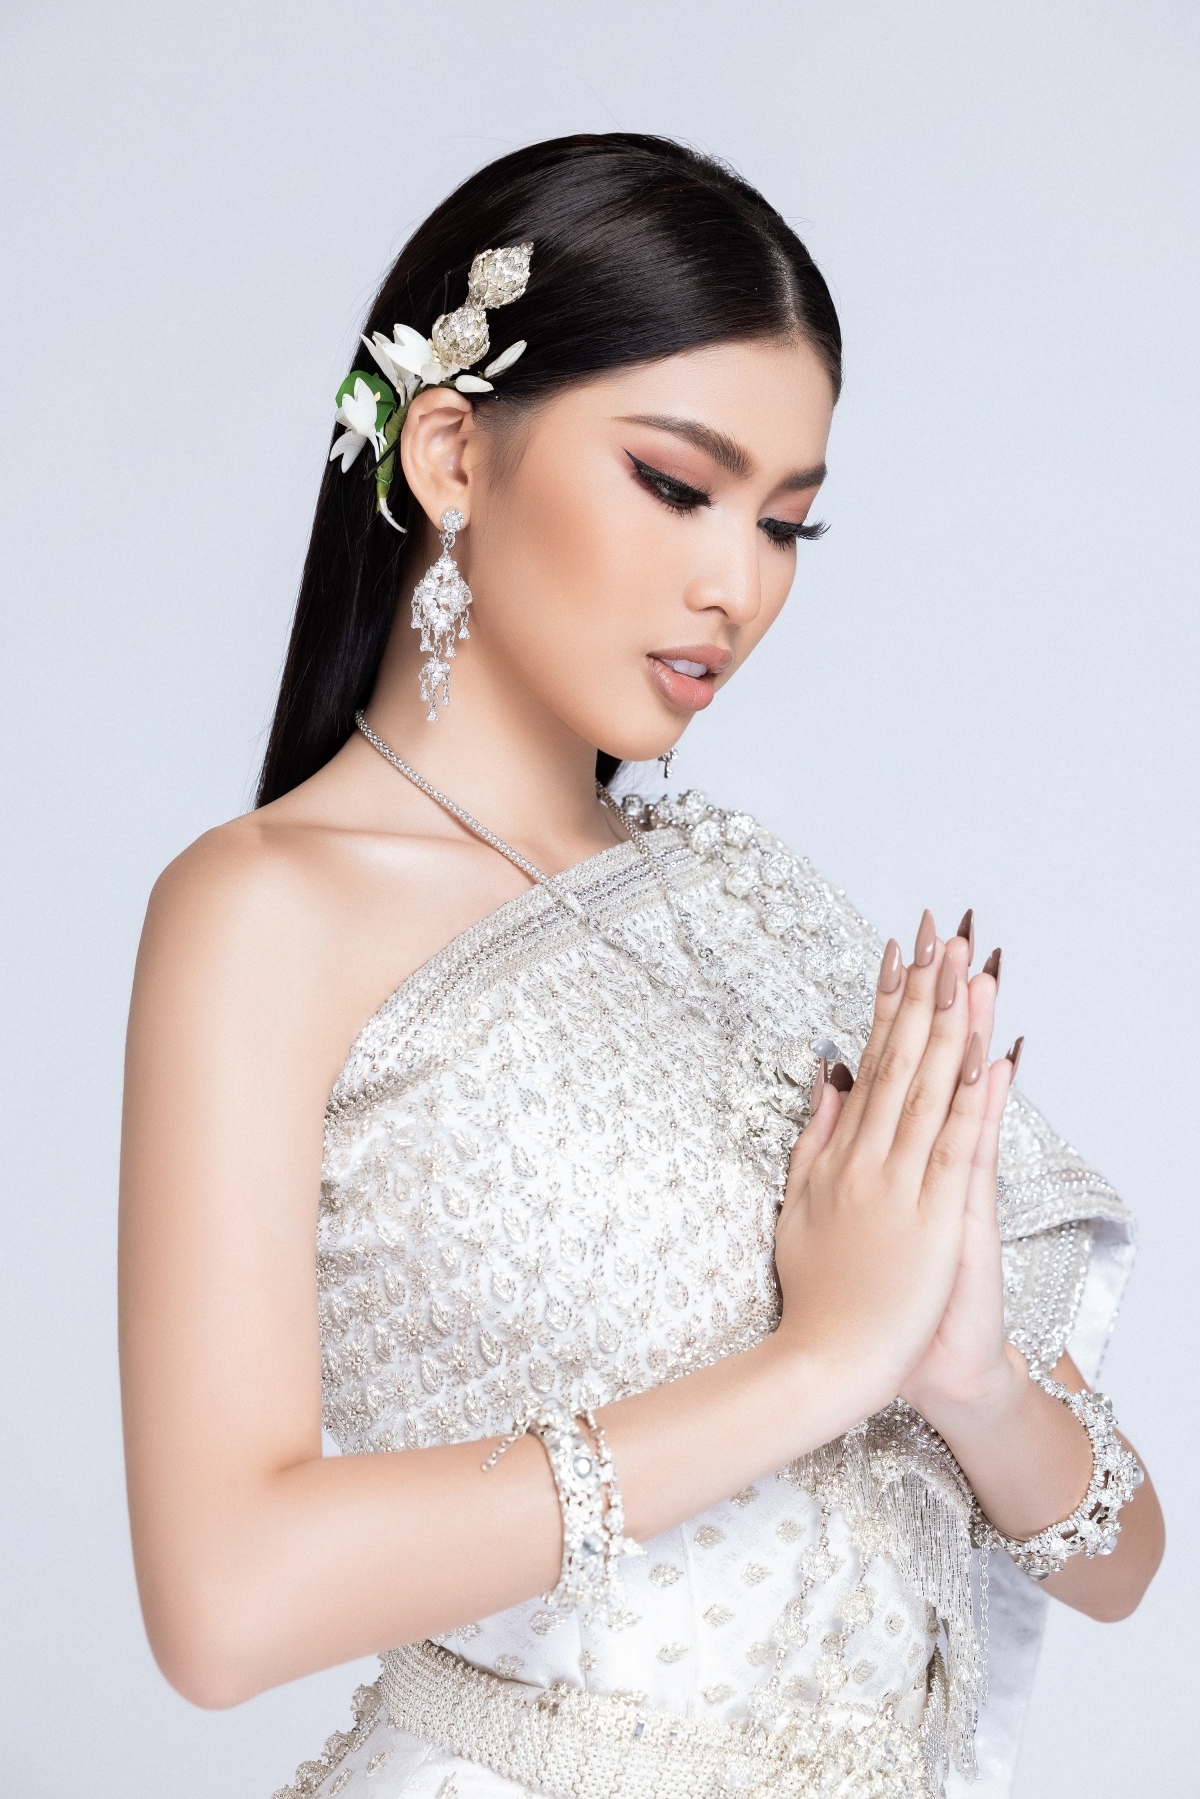 ngoc thao wows in thai costume picture 10